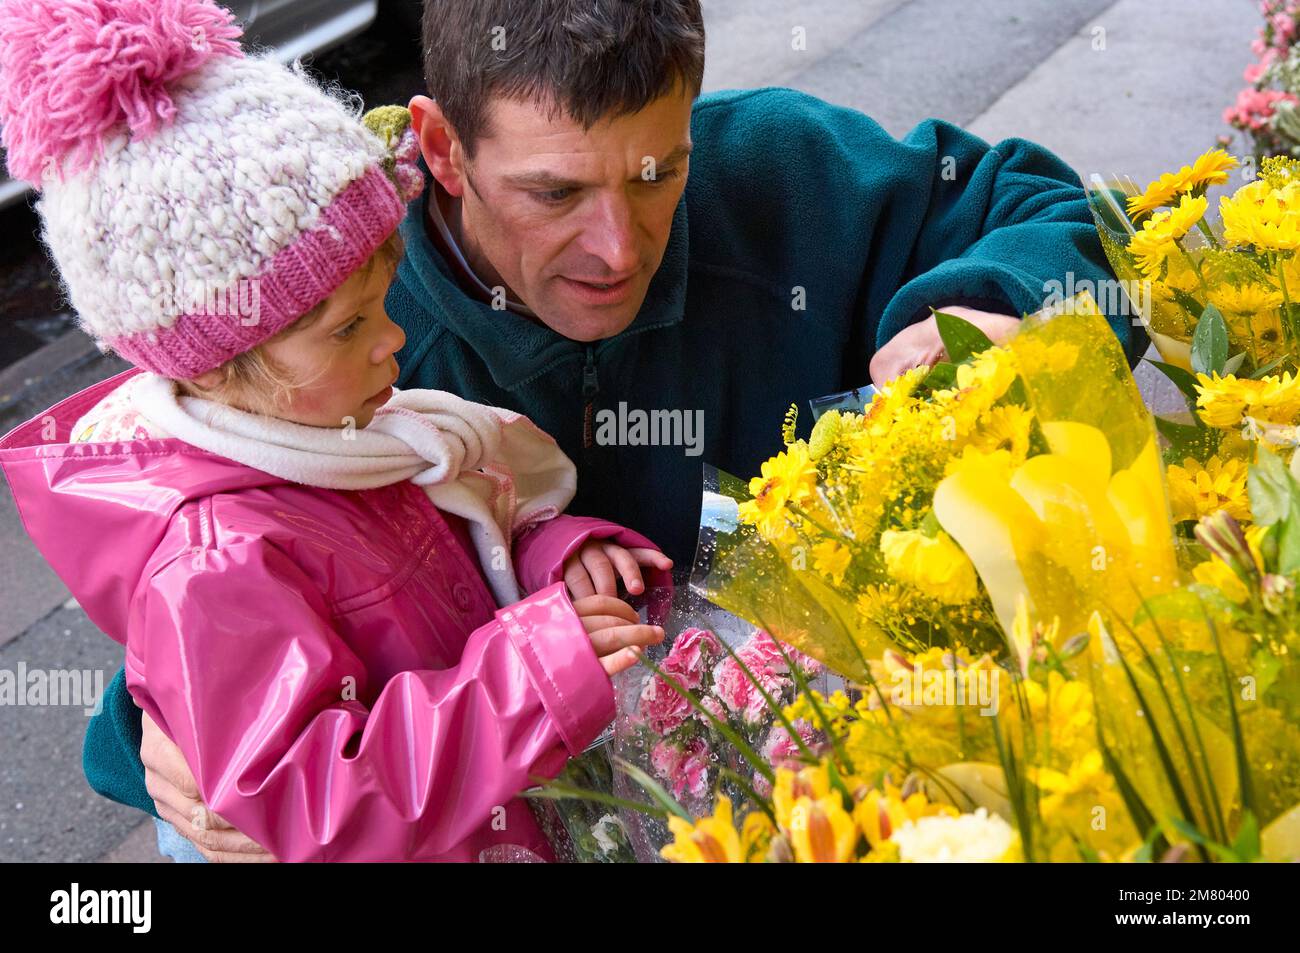 Adult male and young girl choosing a bouquet of flowers on the high street together Stock Photo